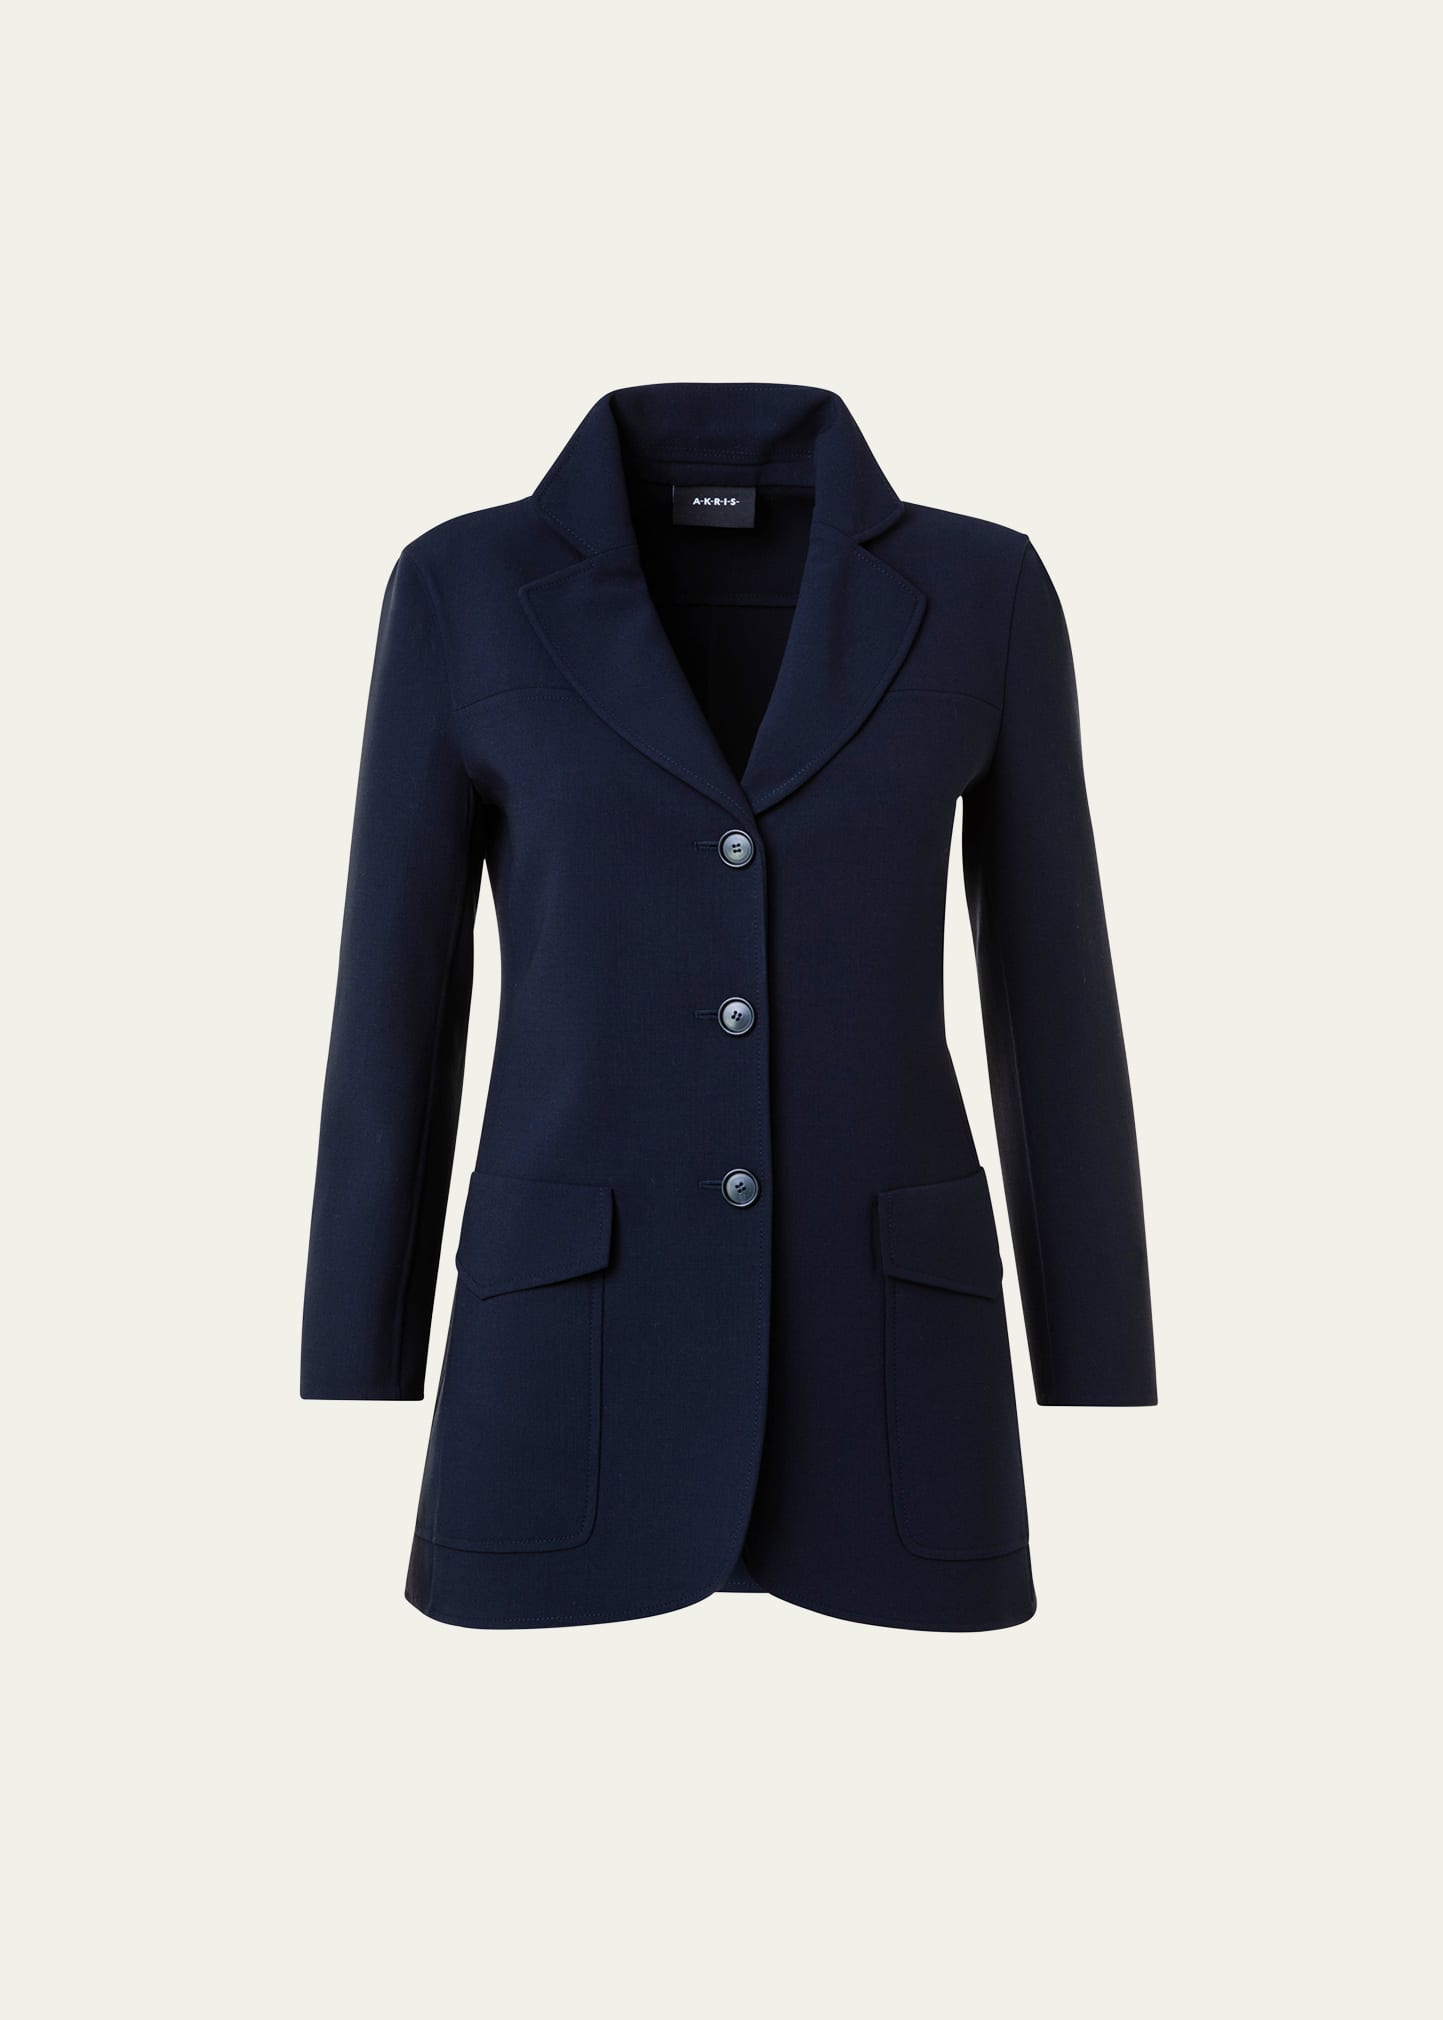 AKRIS DOUBLE-FACE WOOL BLAZER JACKET WITH OVERSIZE PATCH POCKETS